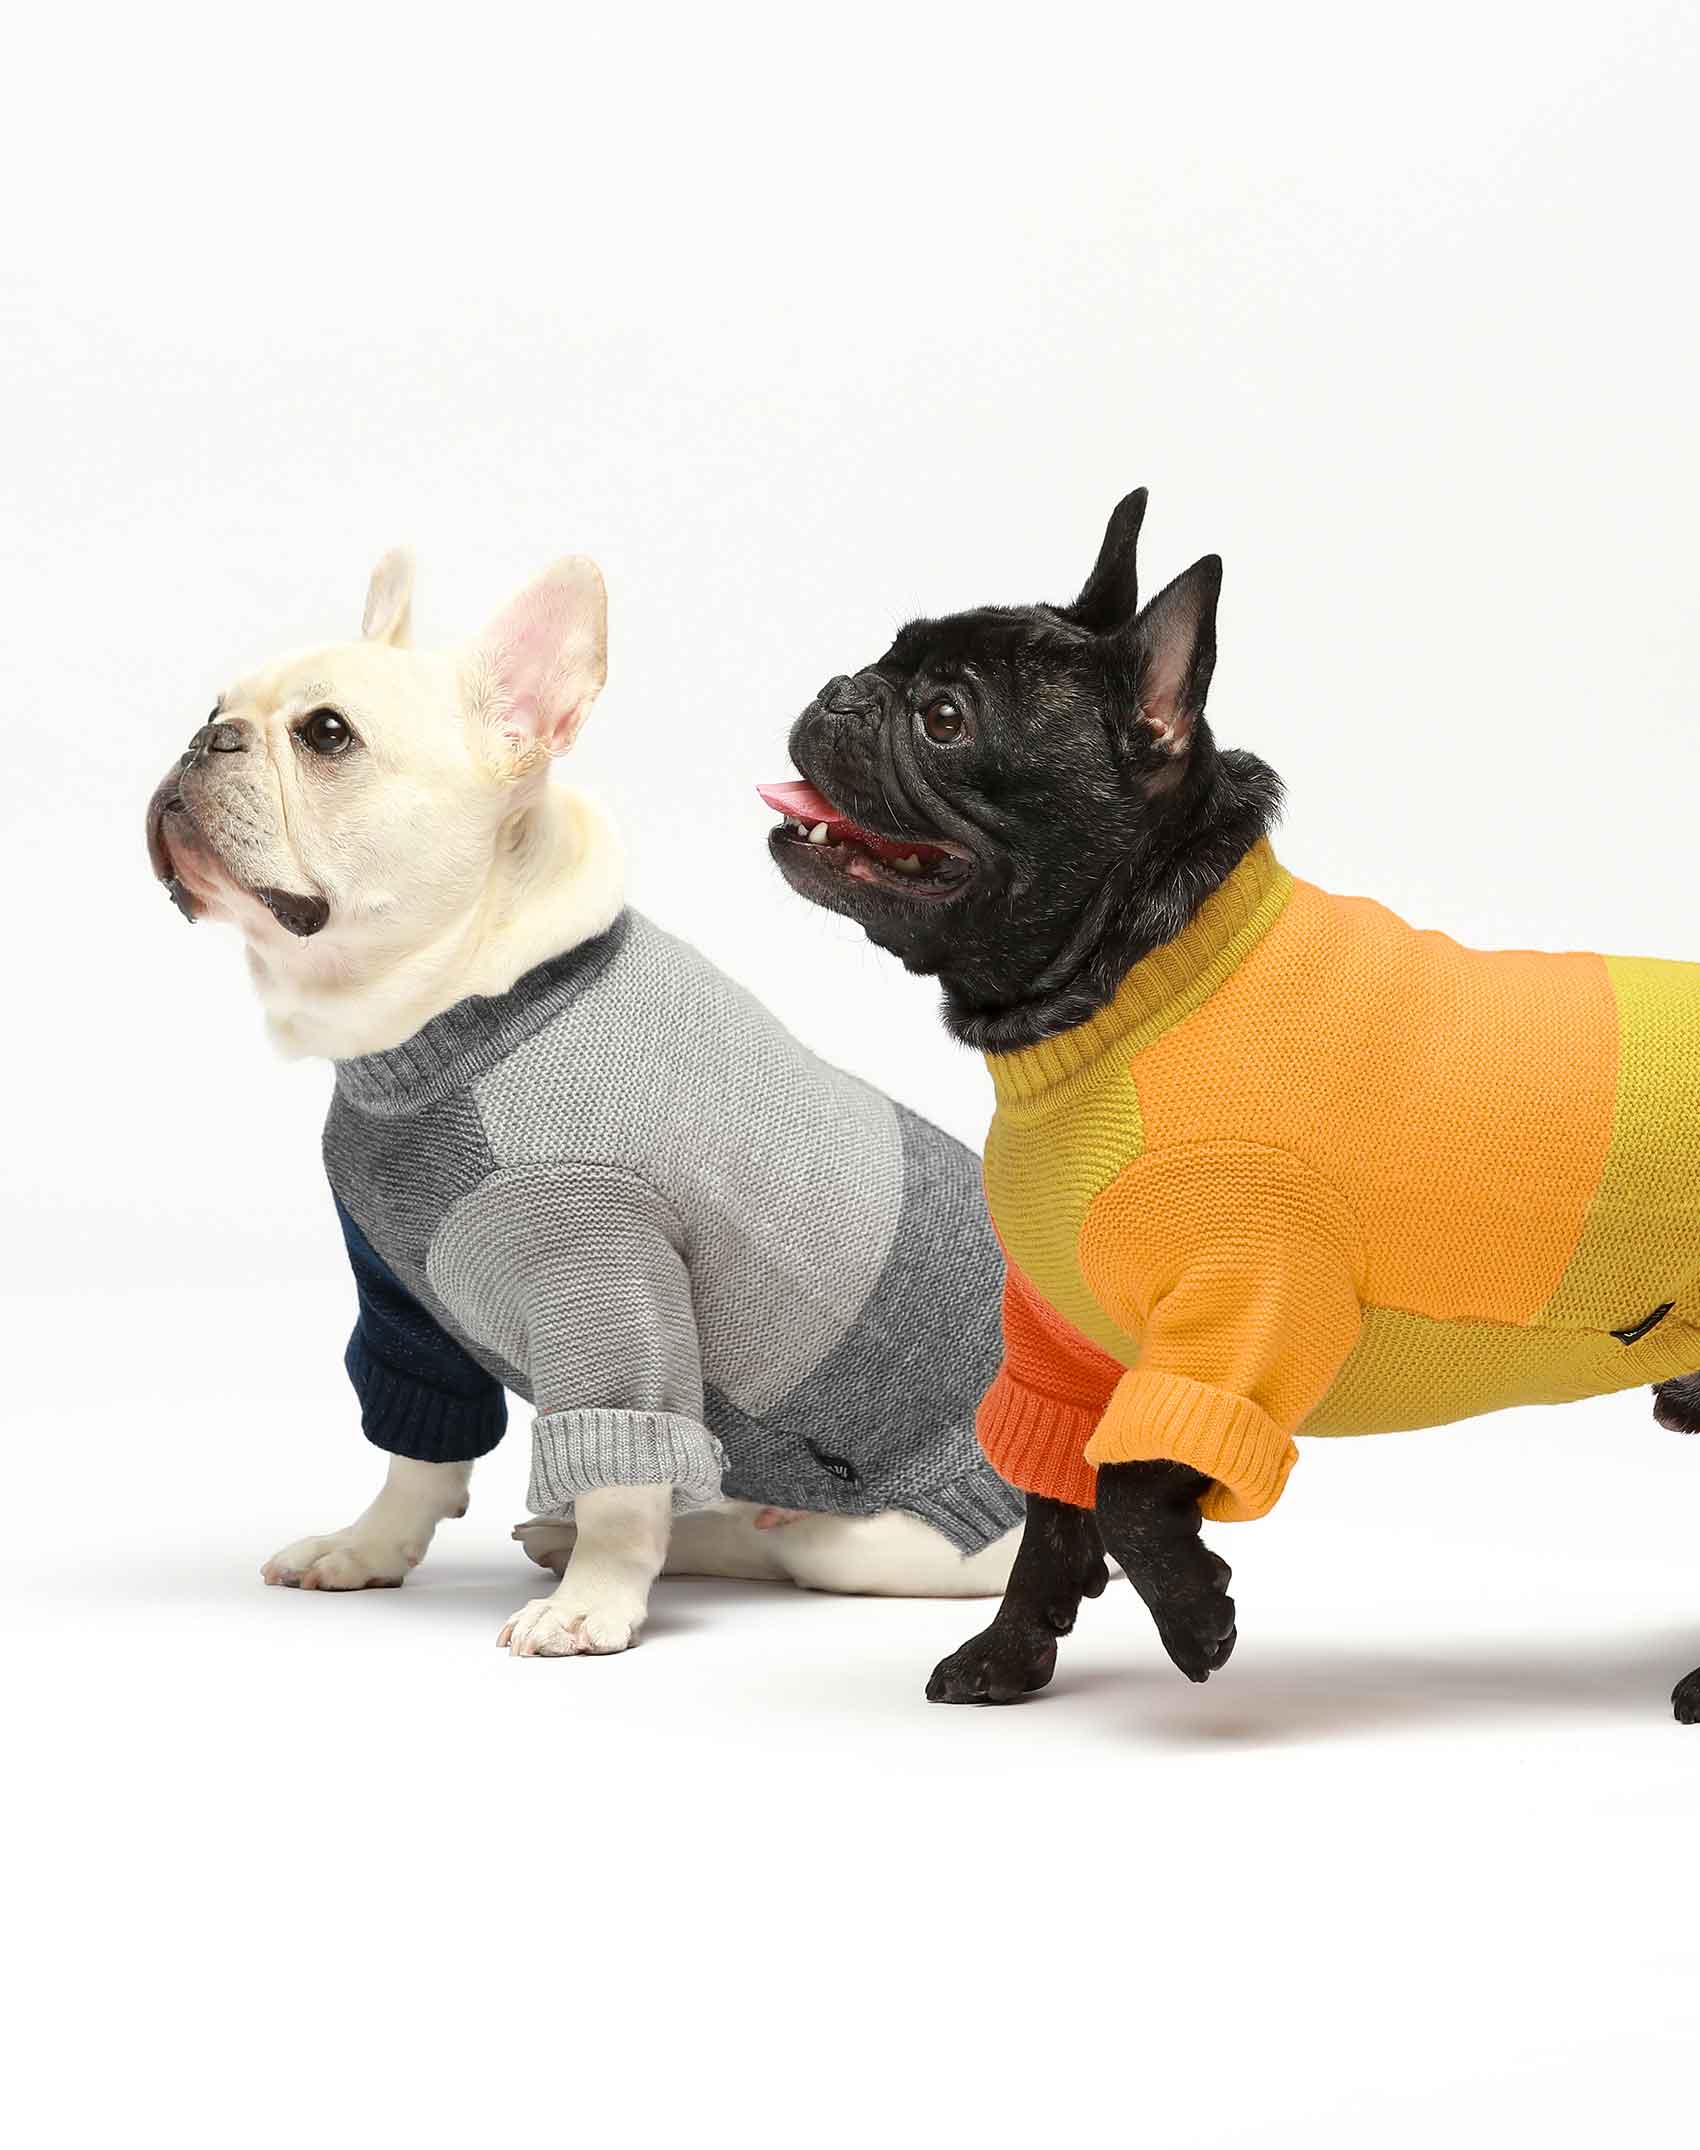 Dog Sweater - Sweaters for Fall and Winter - Thermal and Cozy Dog Sweatshirts - Fitwarm